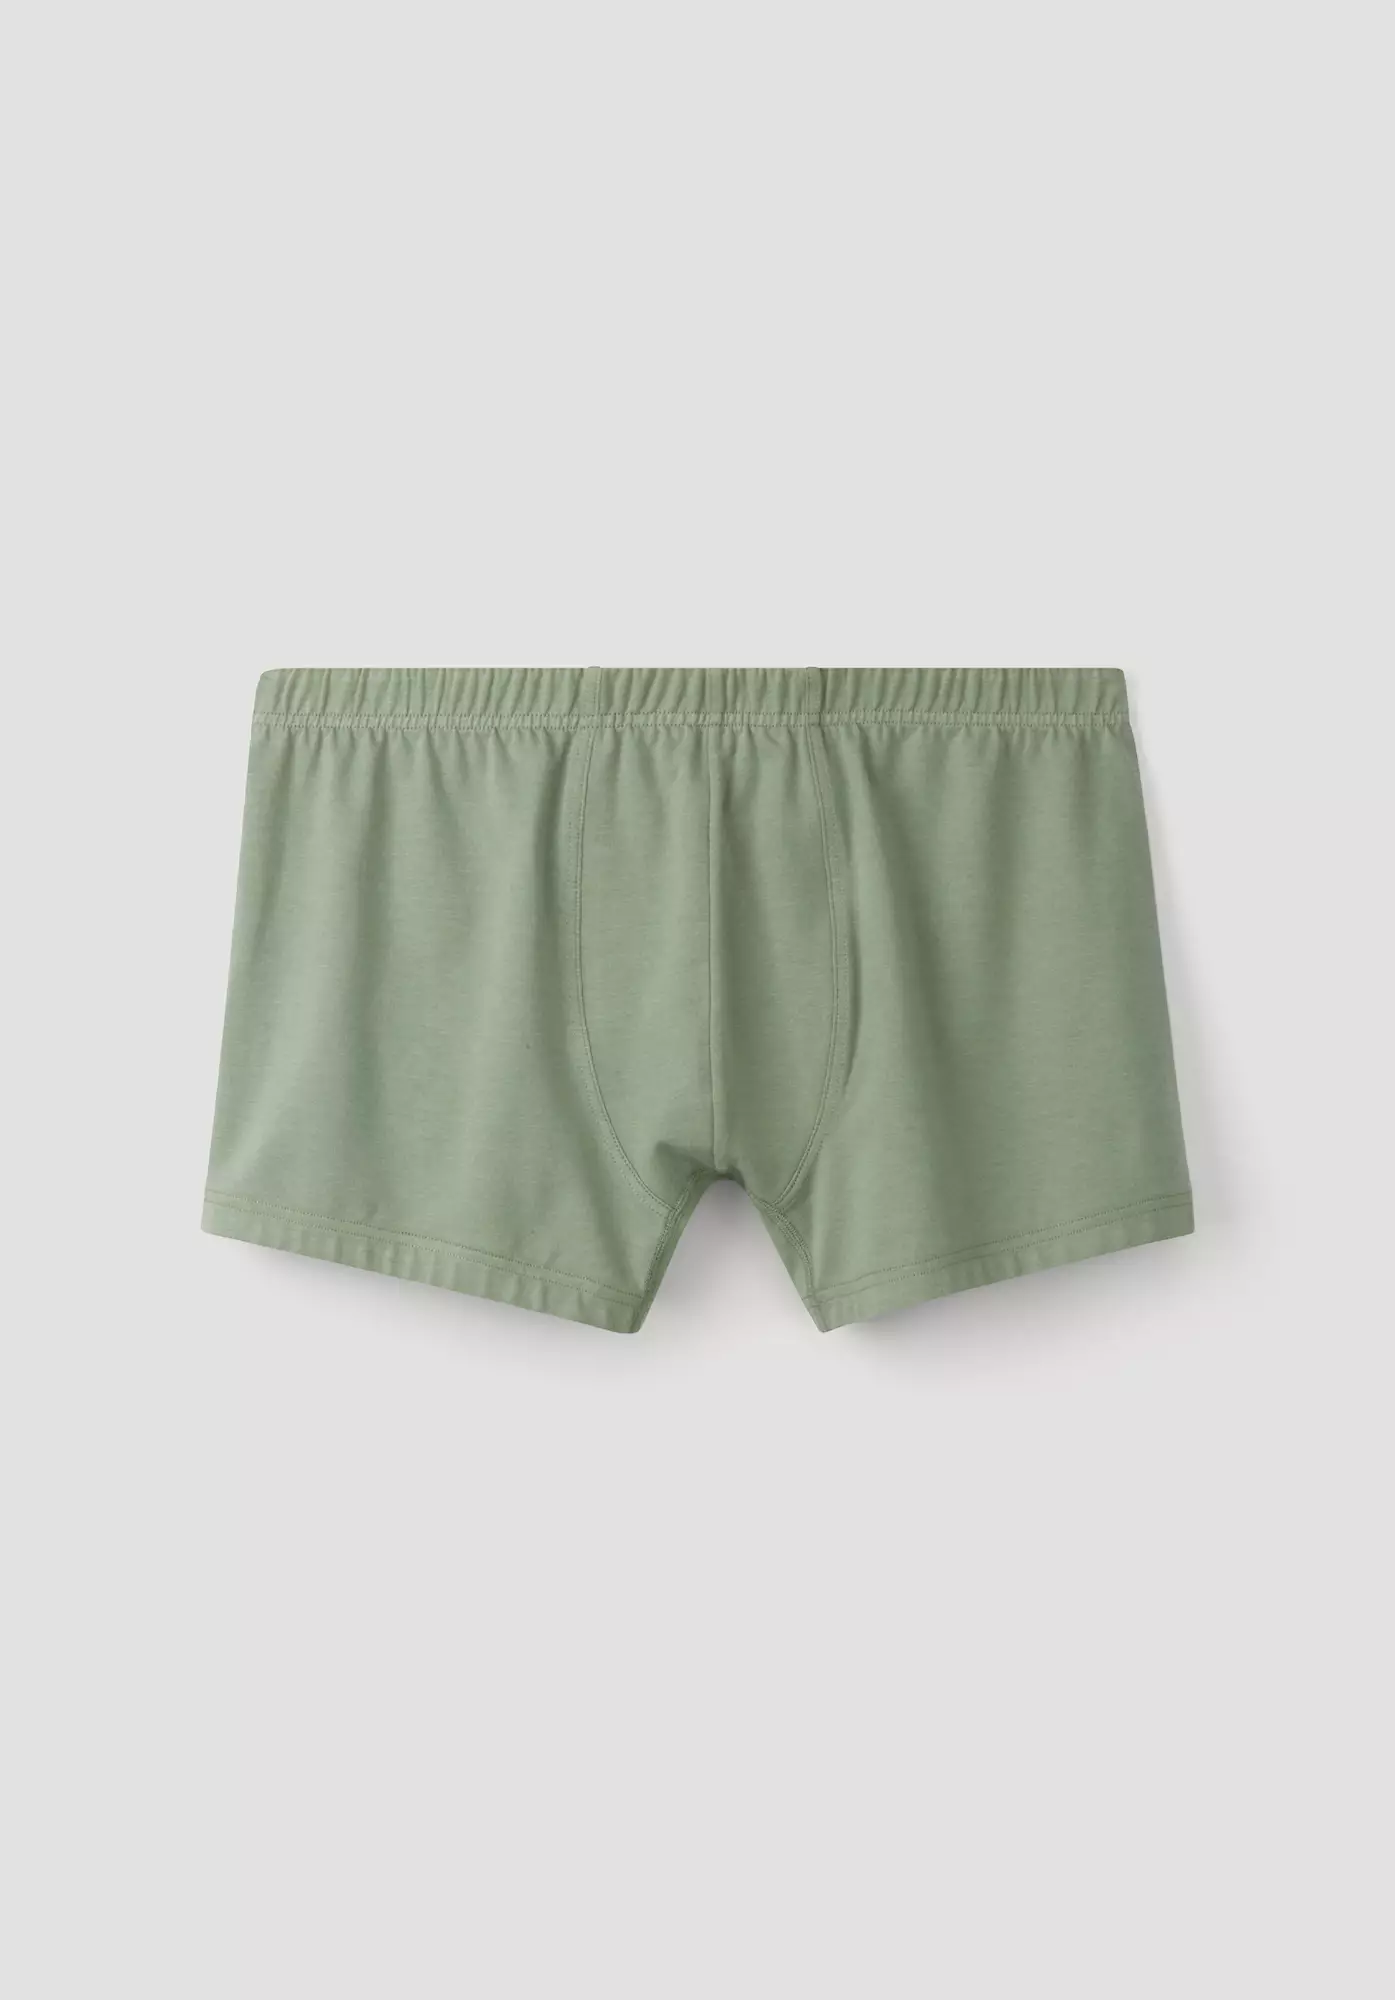 PureLUX pants in a set of 2 made of organic cotton - 2